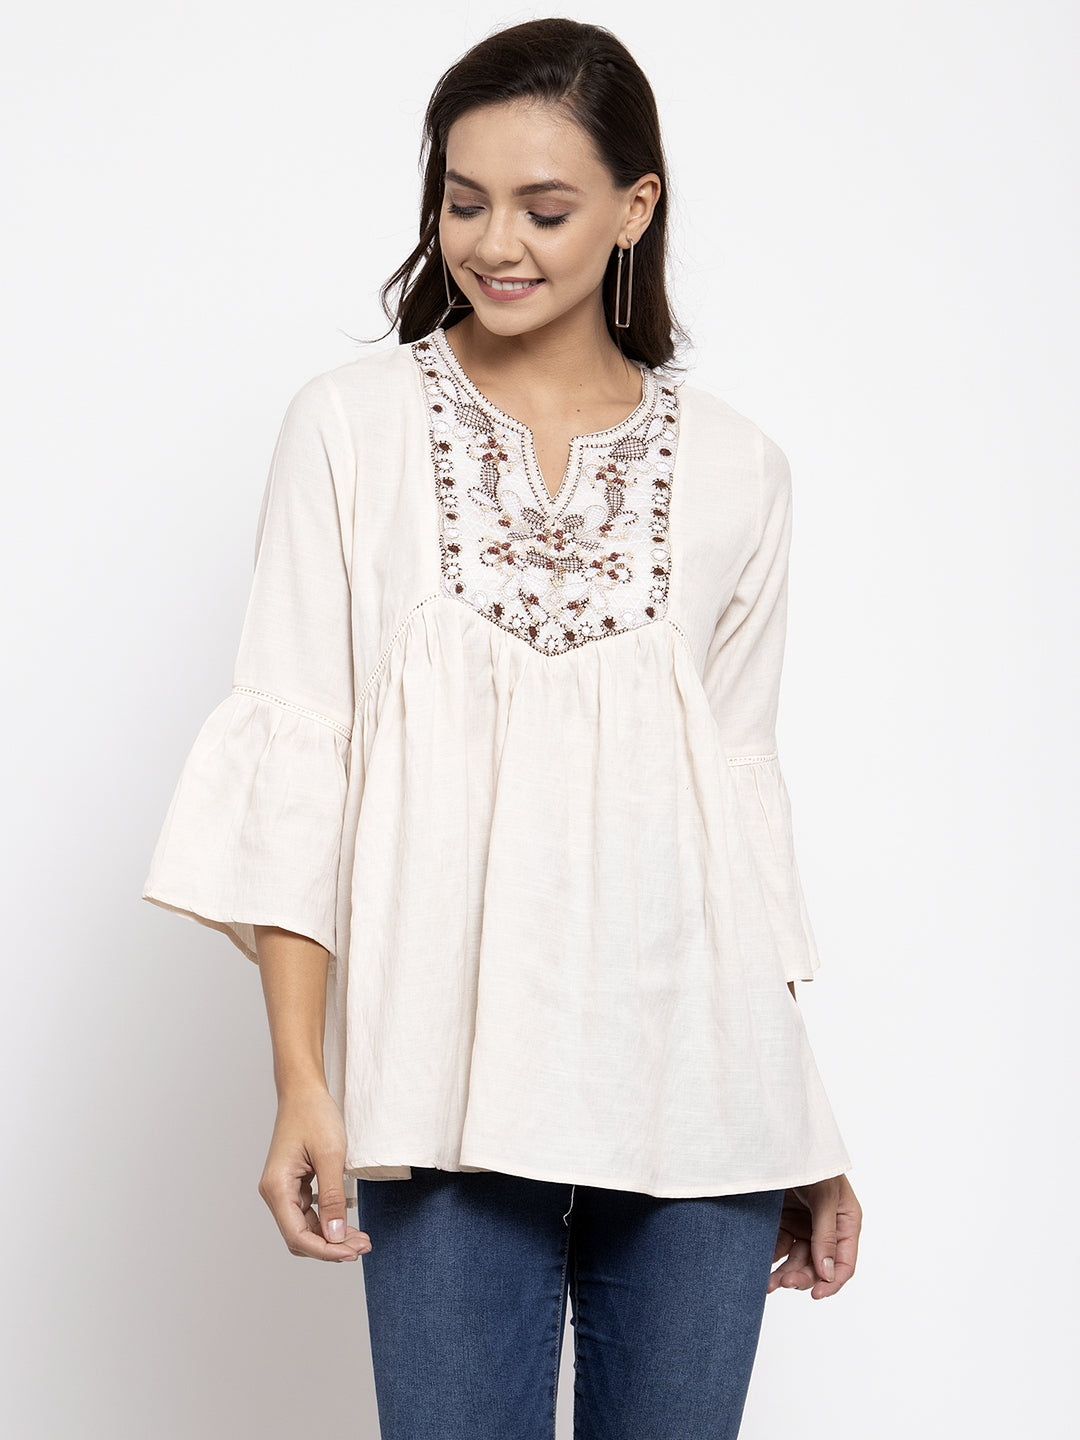 Women Peplum Embroidered Top With Crochet Details